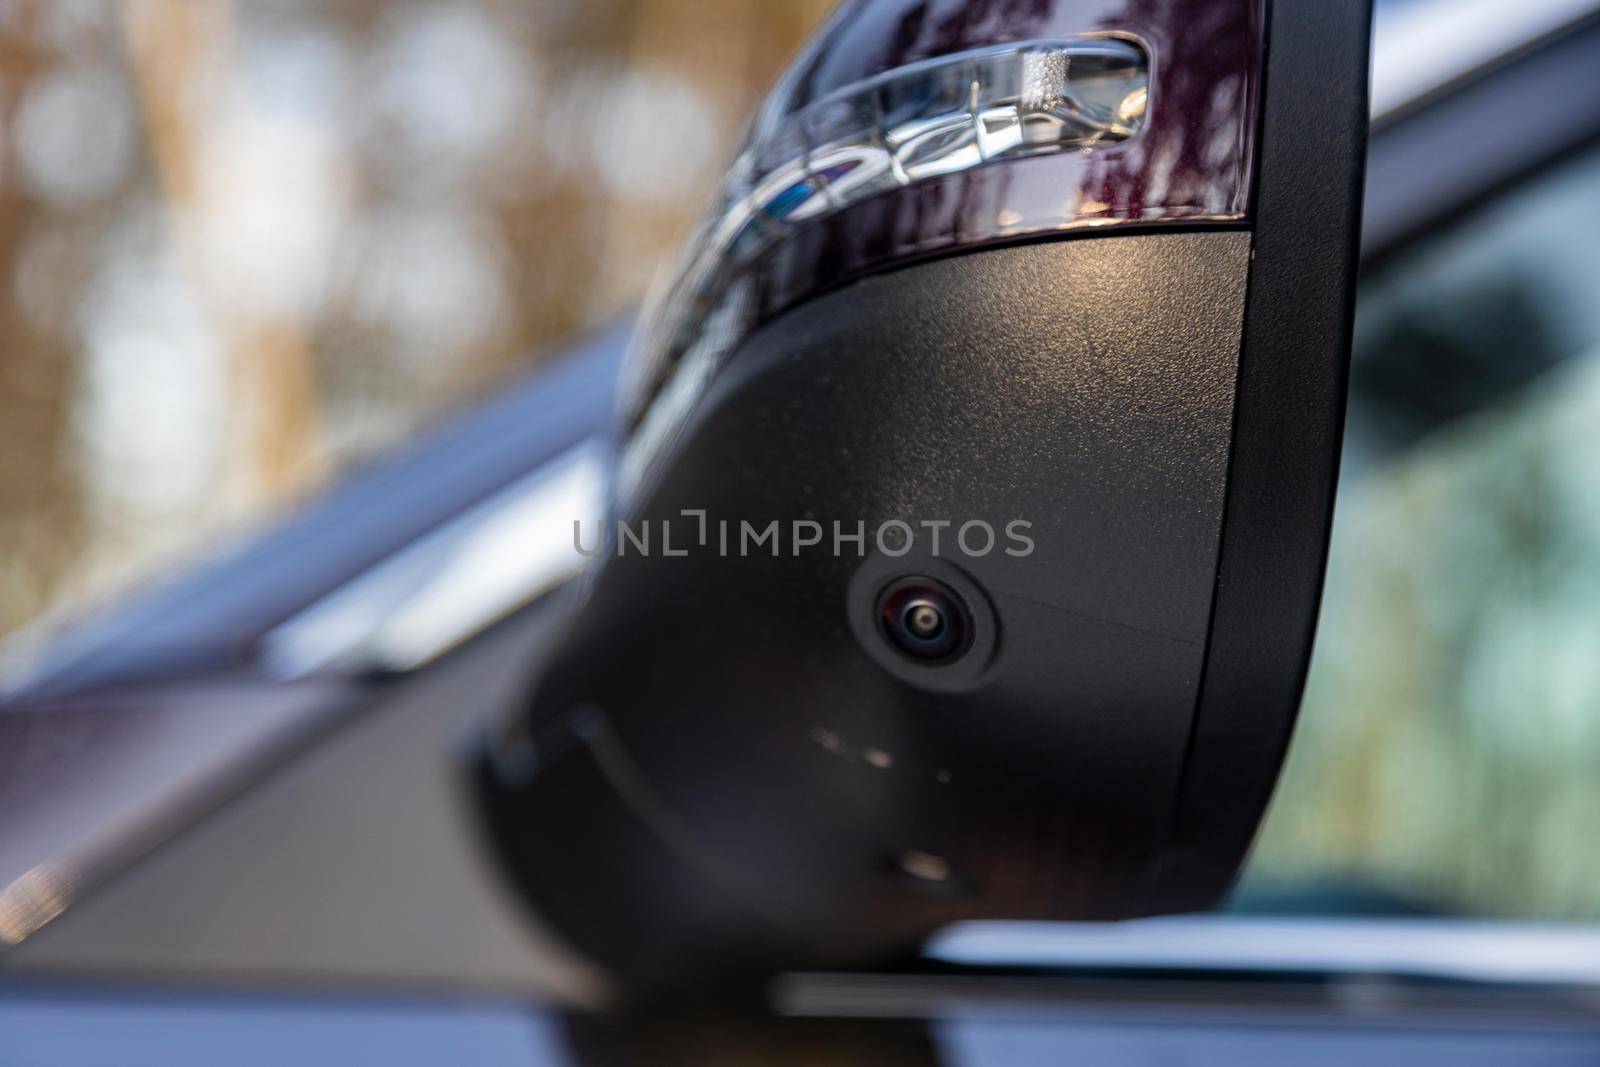 surround cam monitor system system in a modern car. side view rearview mirror of modern car with round view camera